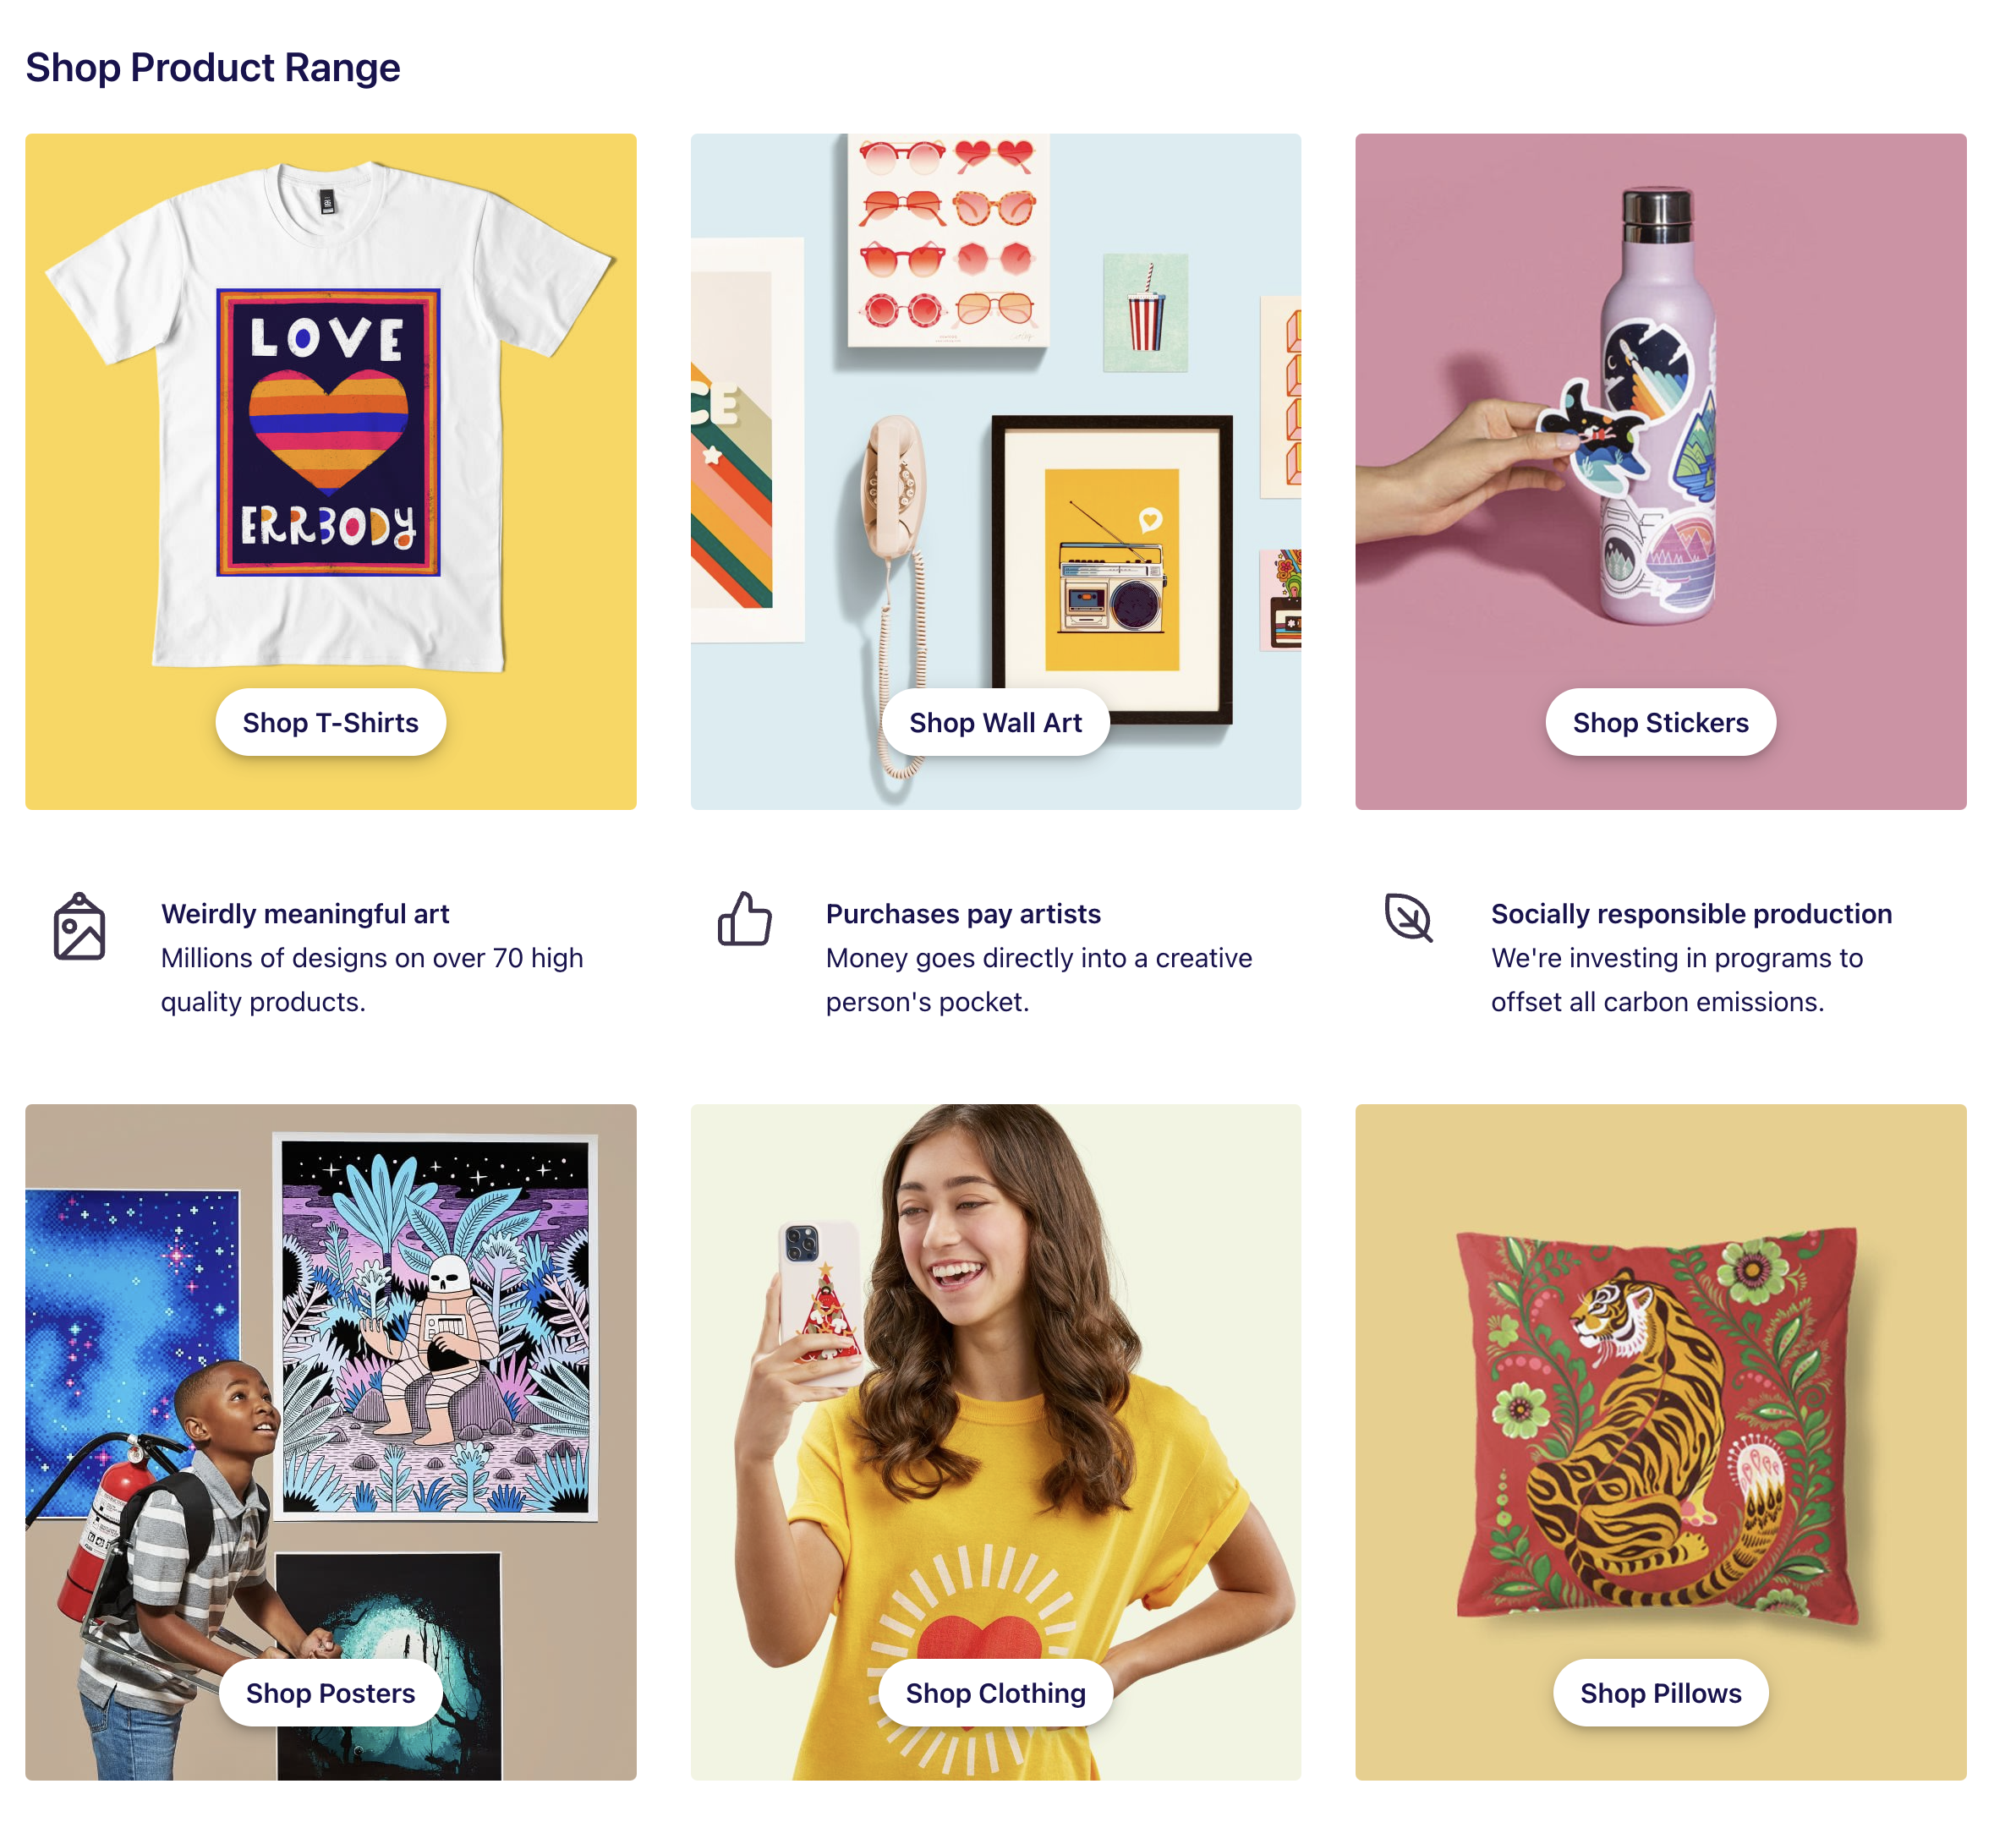 Some of Redbubble's products on their home page